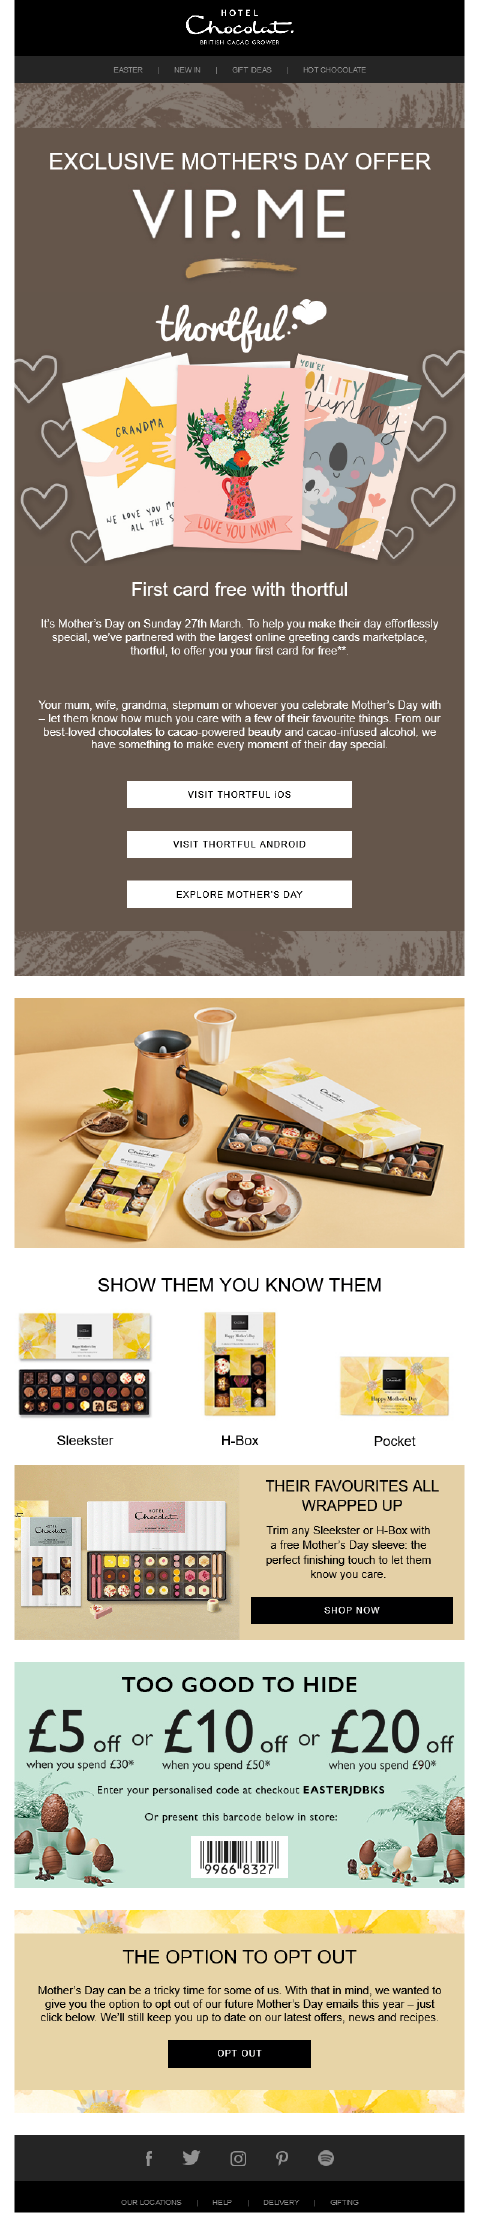 Hotel chocolat mother's day vip